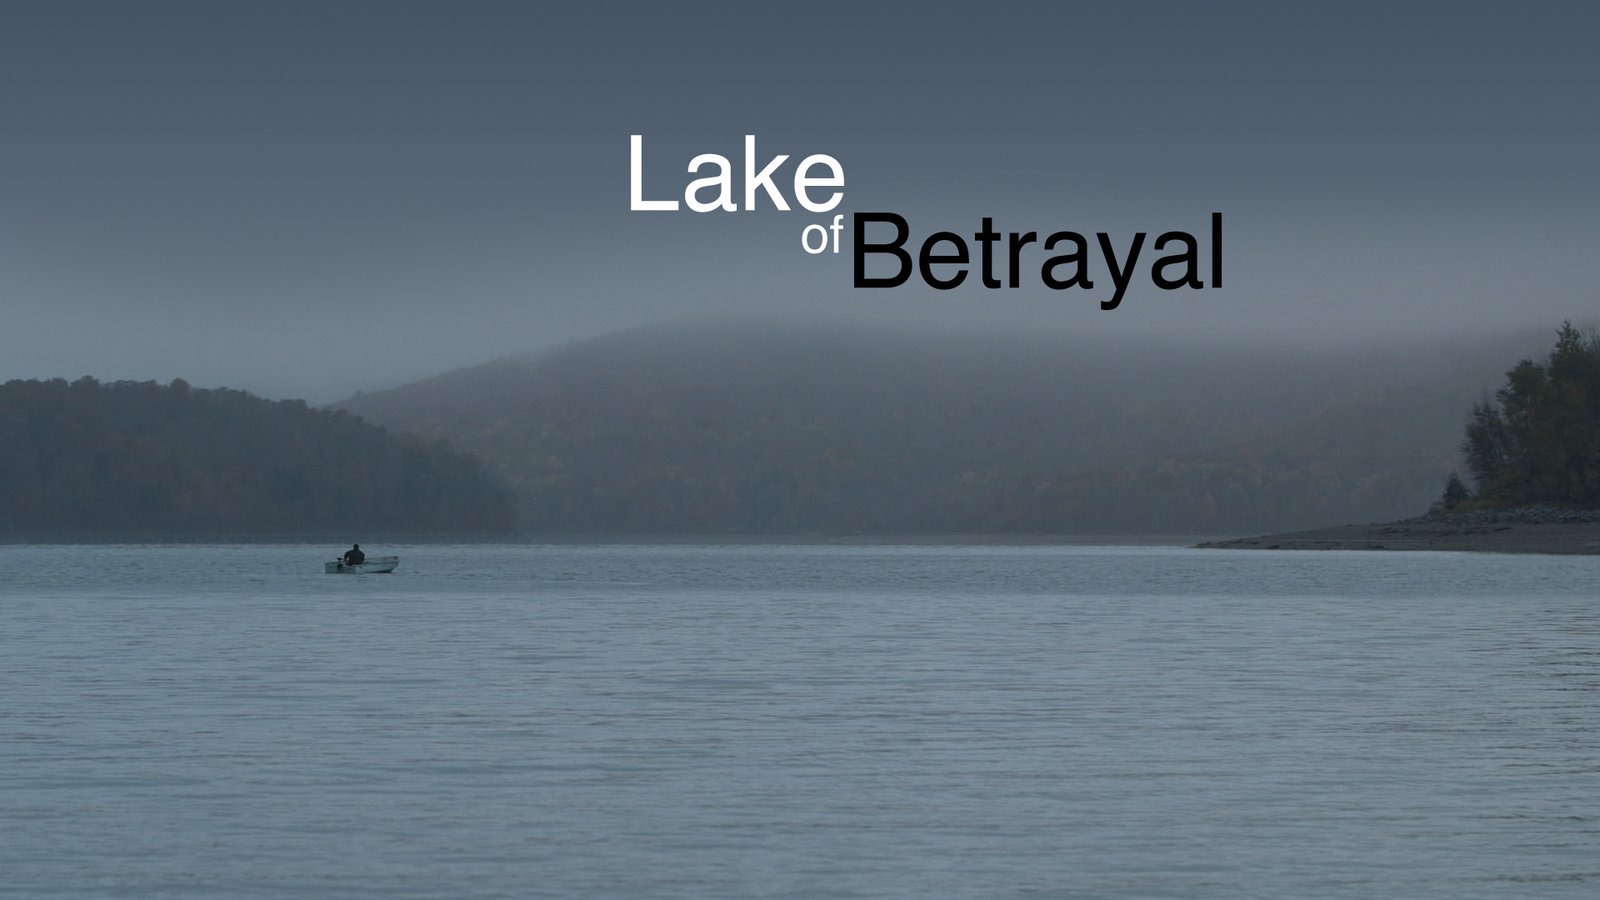 Lake of Betrayal - Seneca People Fighting to Protect Their Ancestral Lands